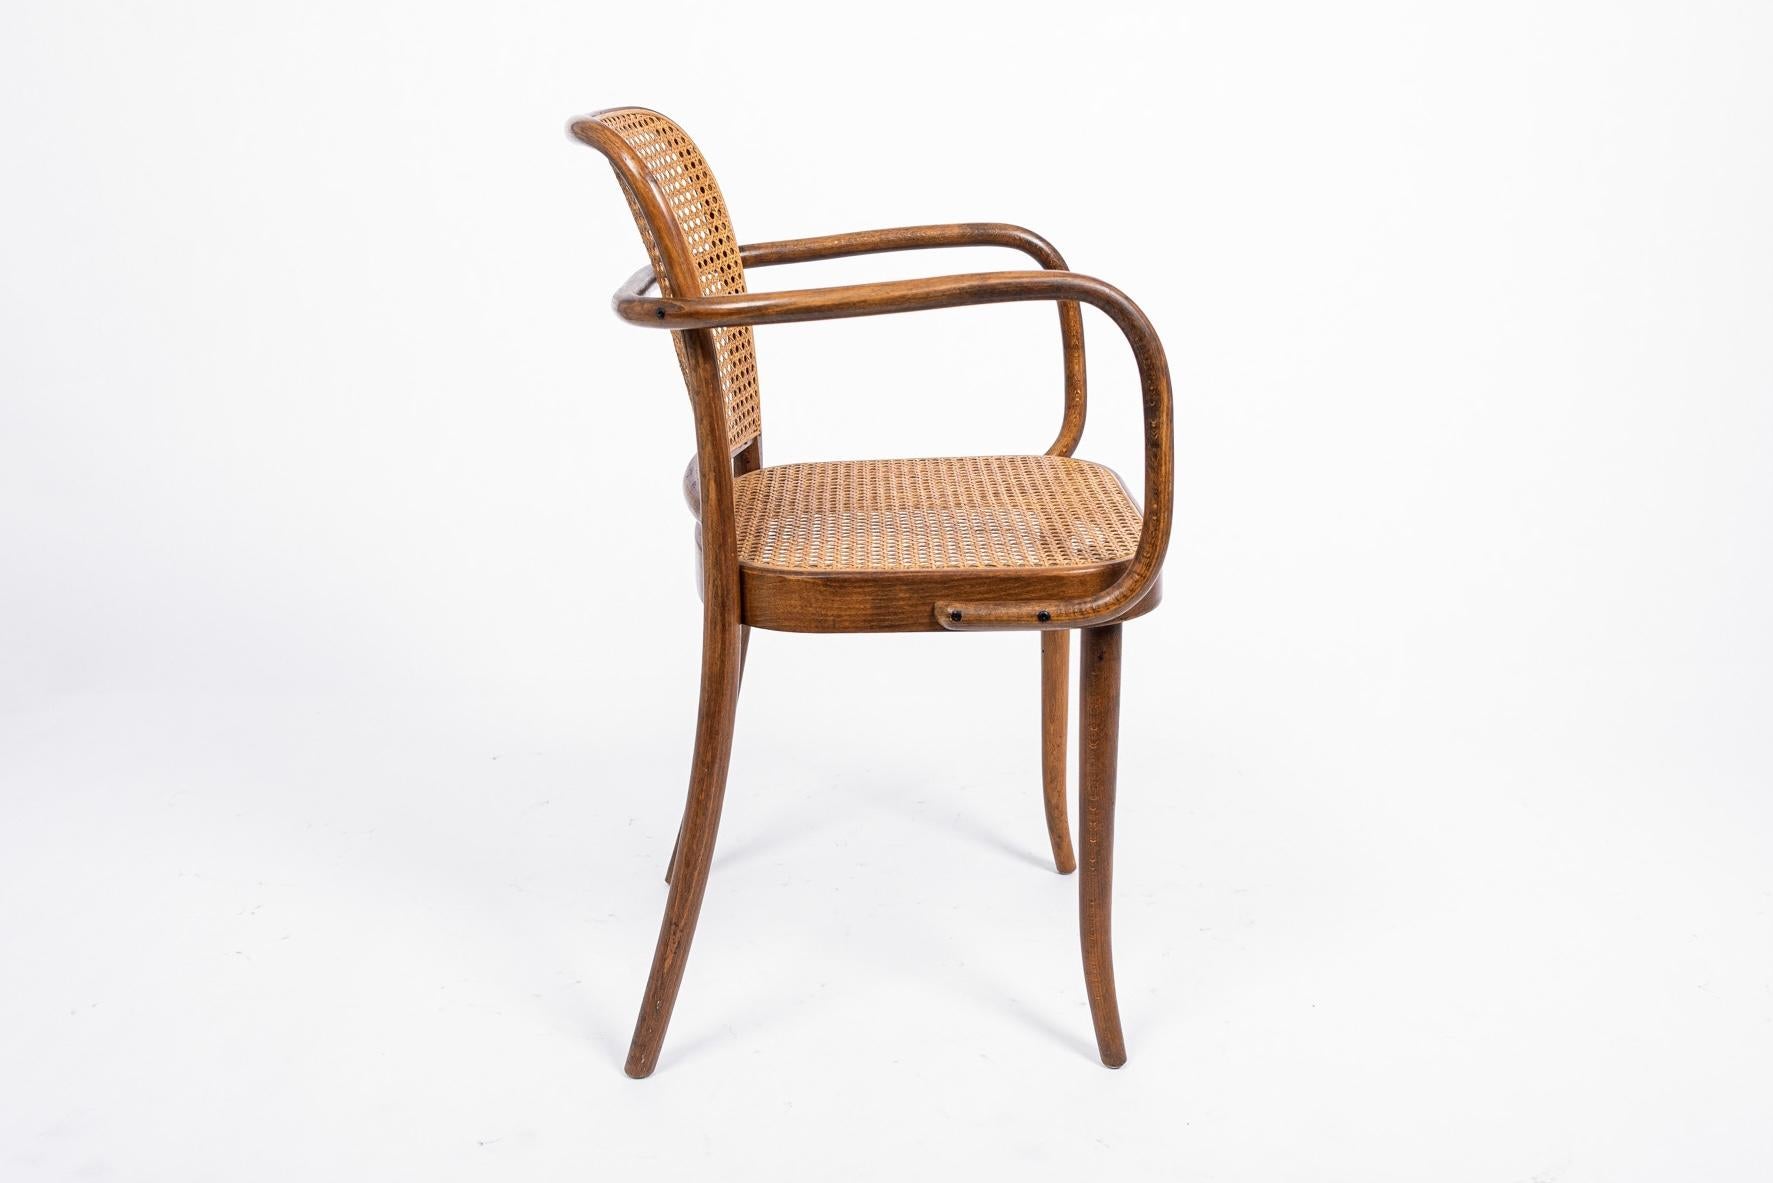 This vintage midcentury Bentwood Prague Model 811 cafe dining chair was originally designed by Austrian architects Josef Hoffman & Josef Frank for Thonet in the 1920s. This chair was made in Czechoslovakia by Stendig circa 1960. The iconic armchair